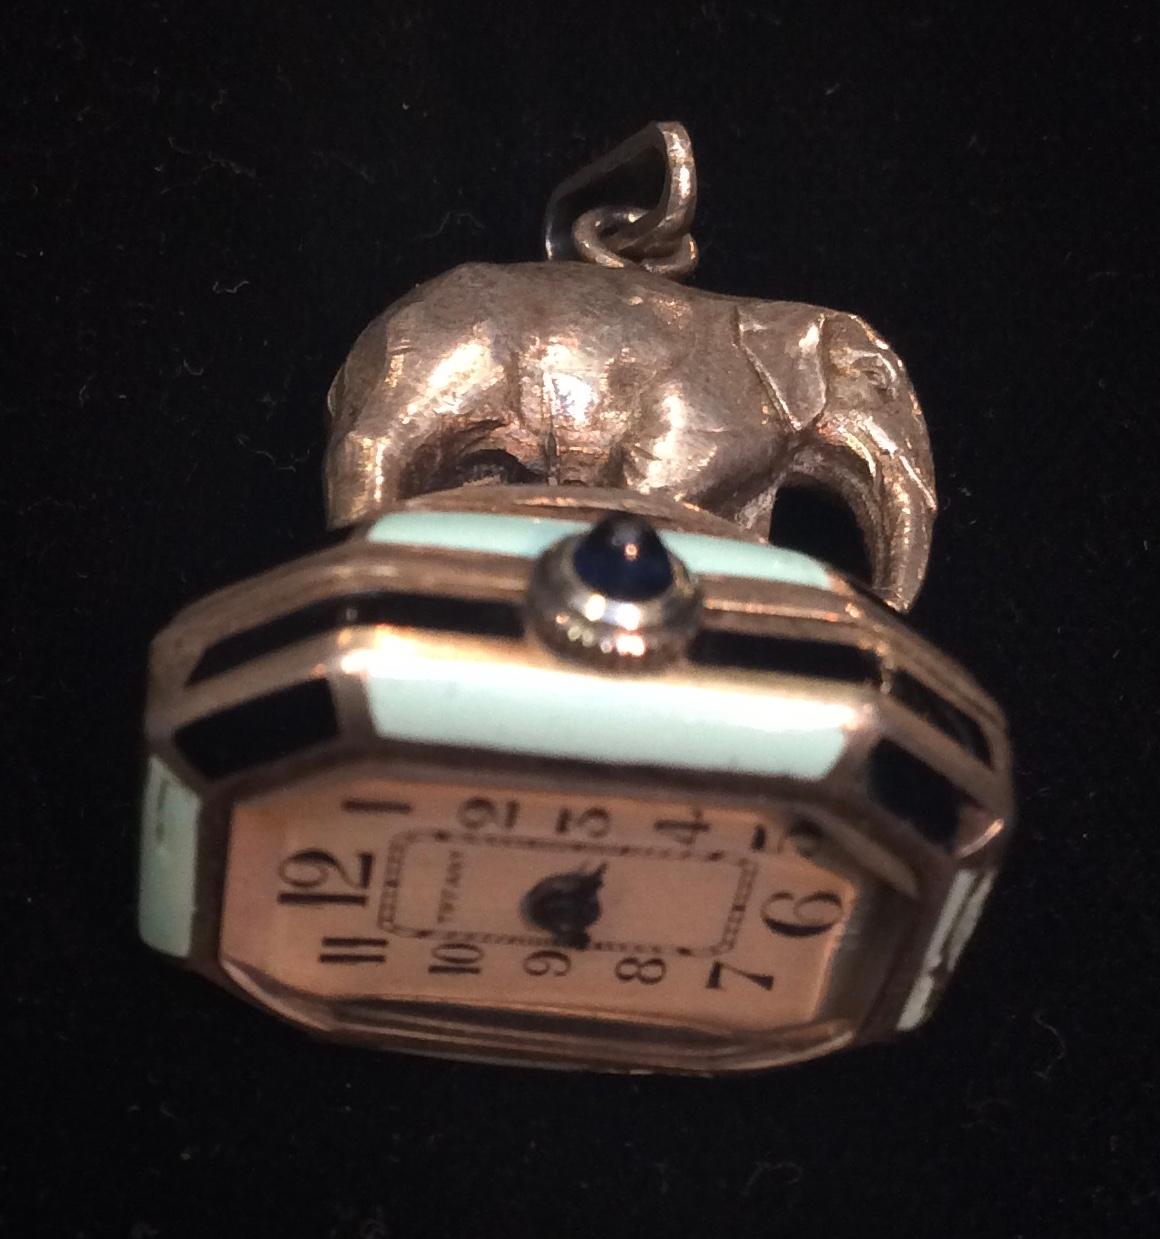 Stunning and Rare Vintage Enamel Pendant Watch by Tiffany 6